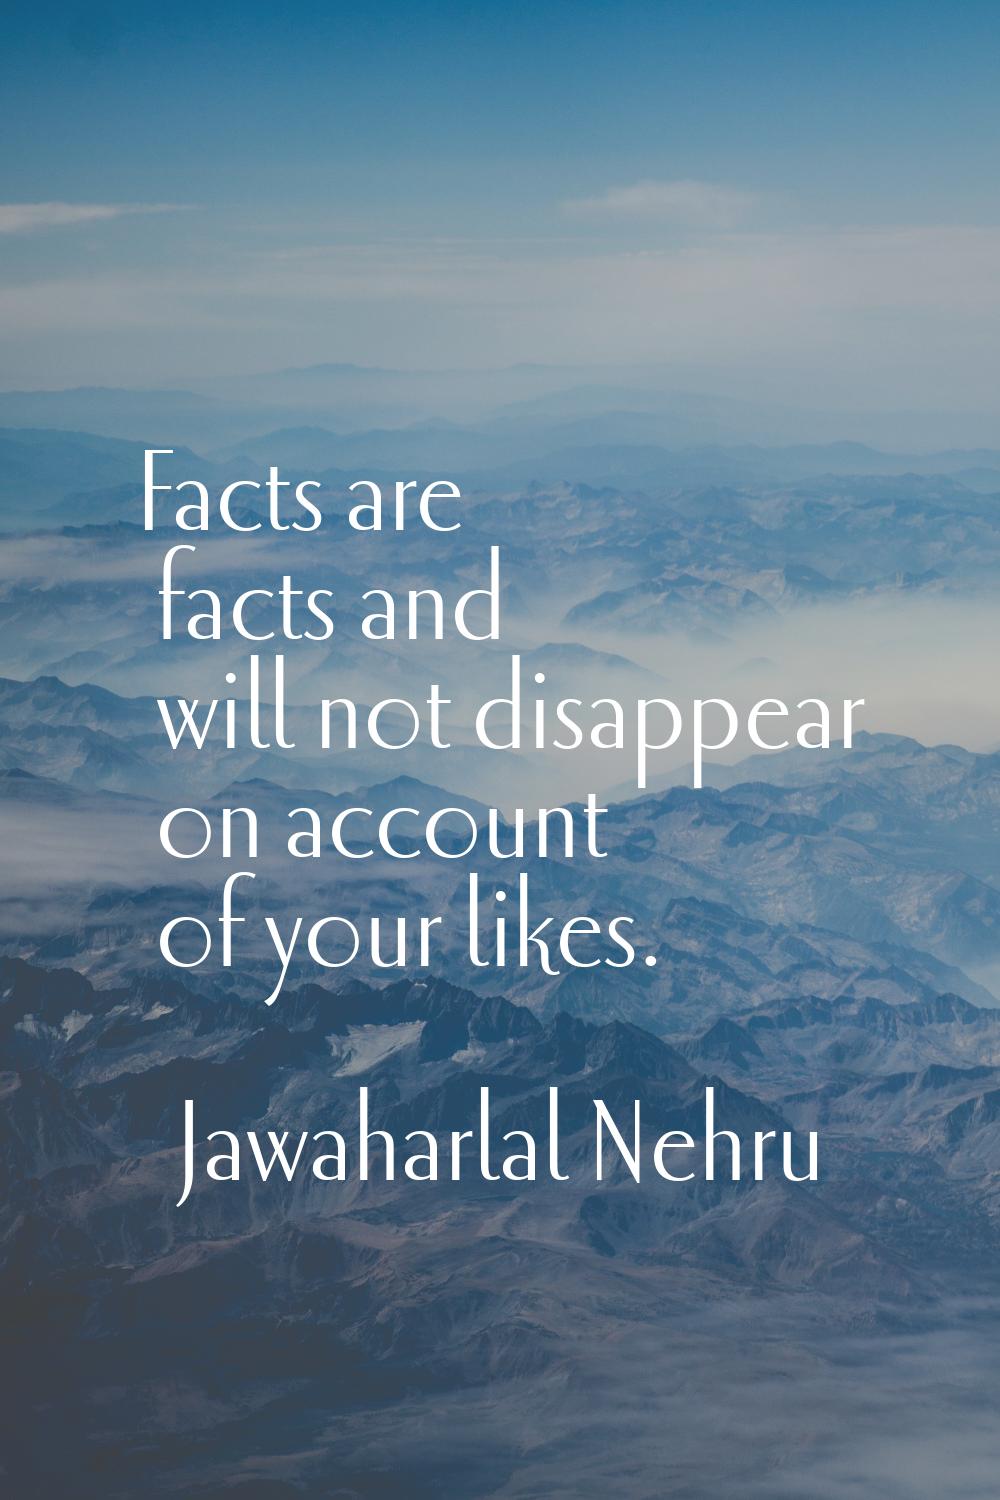 Facts are facts and will not disappear on account of your likes.